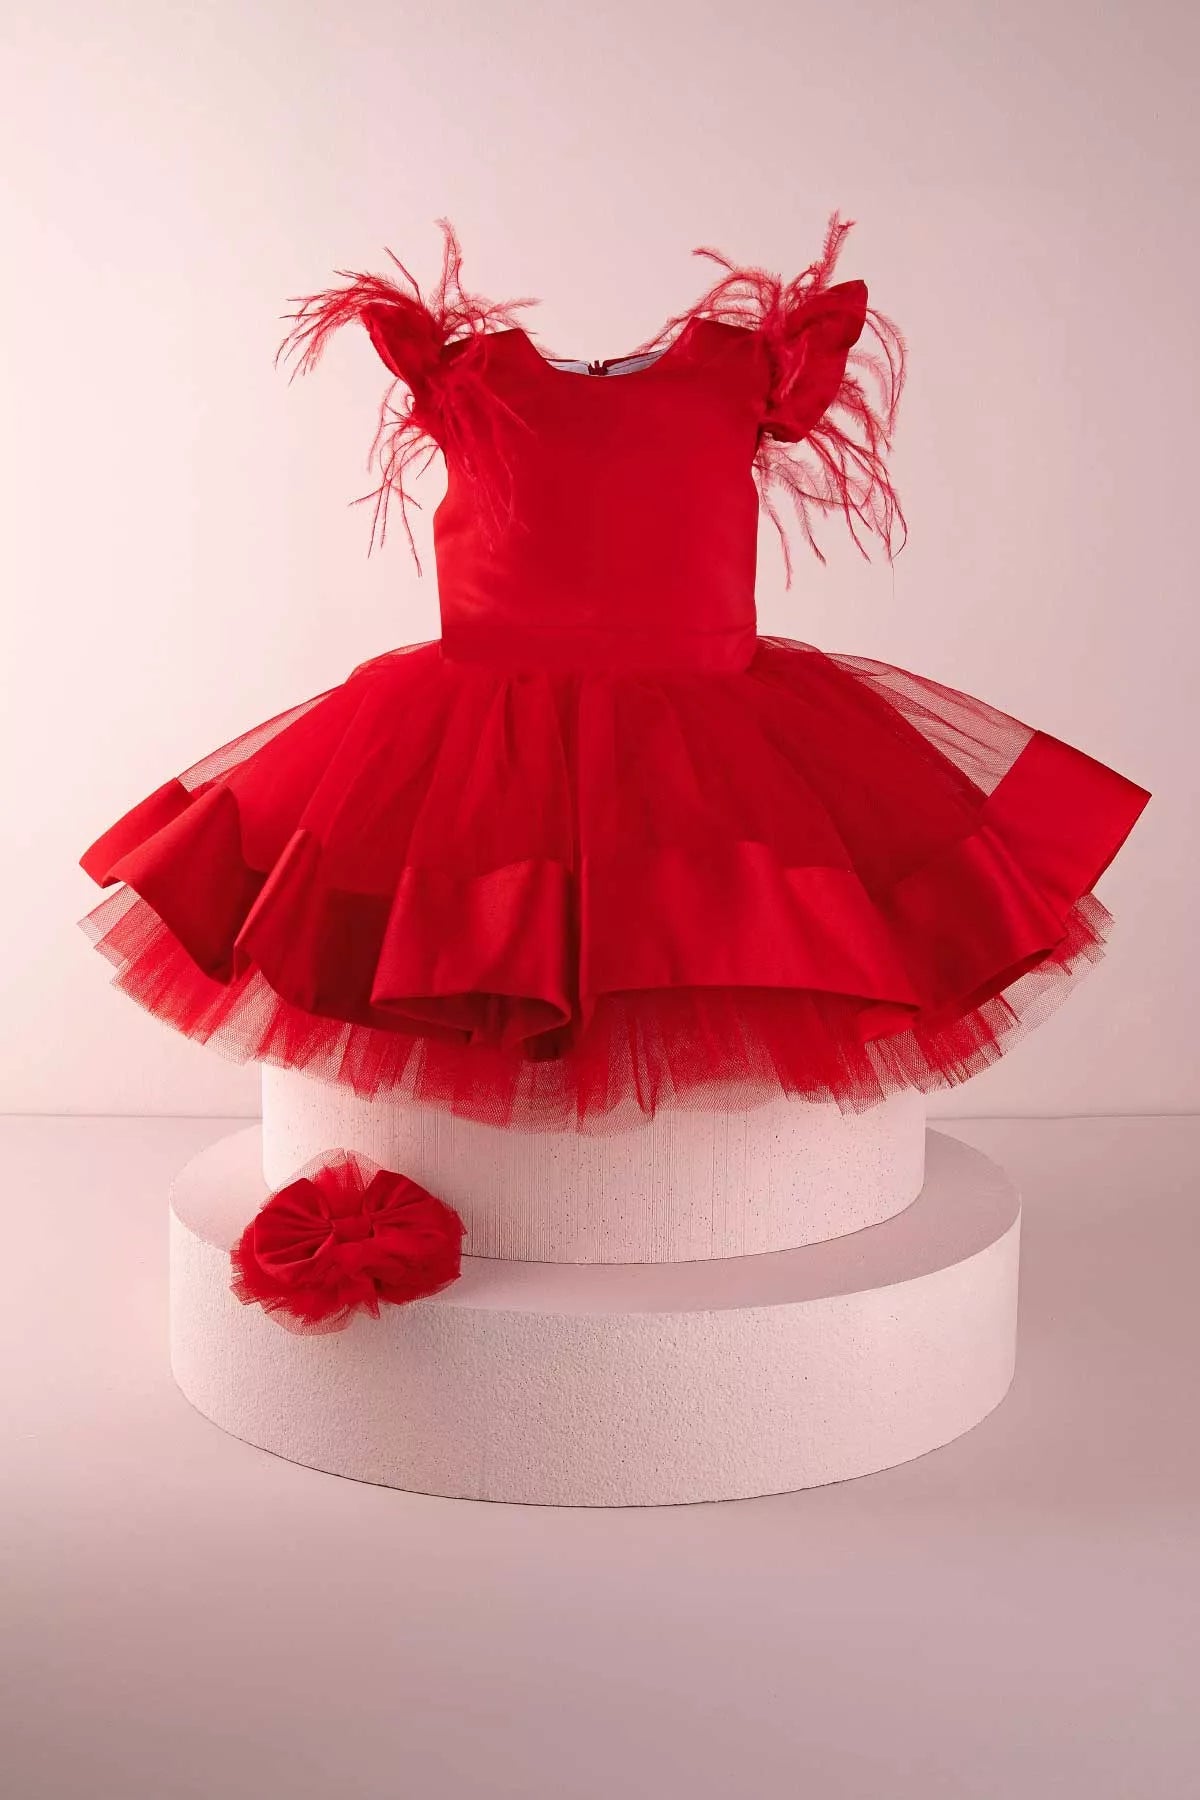 Buy Baby Girl Christmas Dress, Birthday Dress 1 Year Old Baby, Toddler Red  Dress, Holiday Baby Dress, Christmas Red Dress Online in India - Etsy